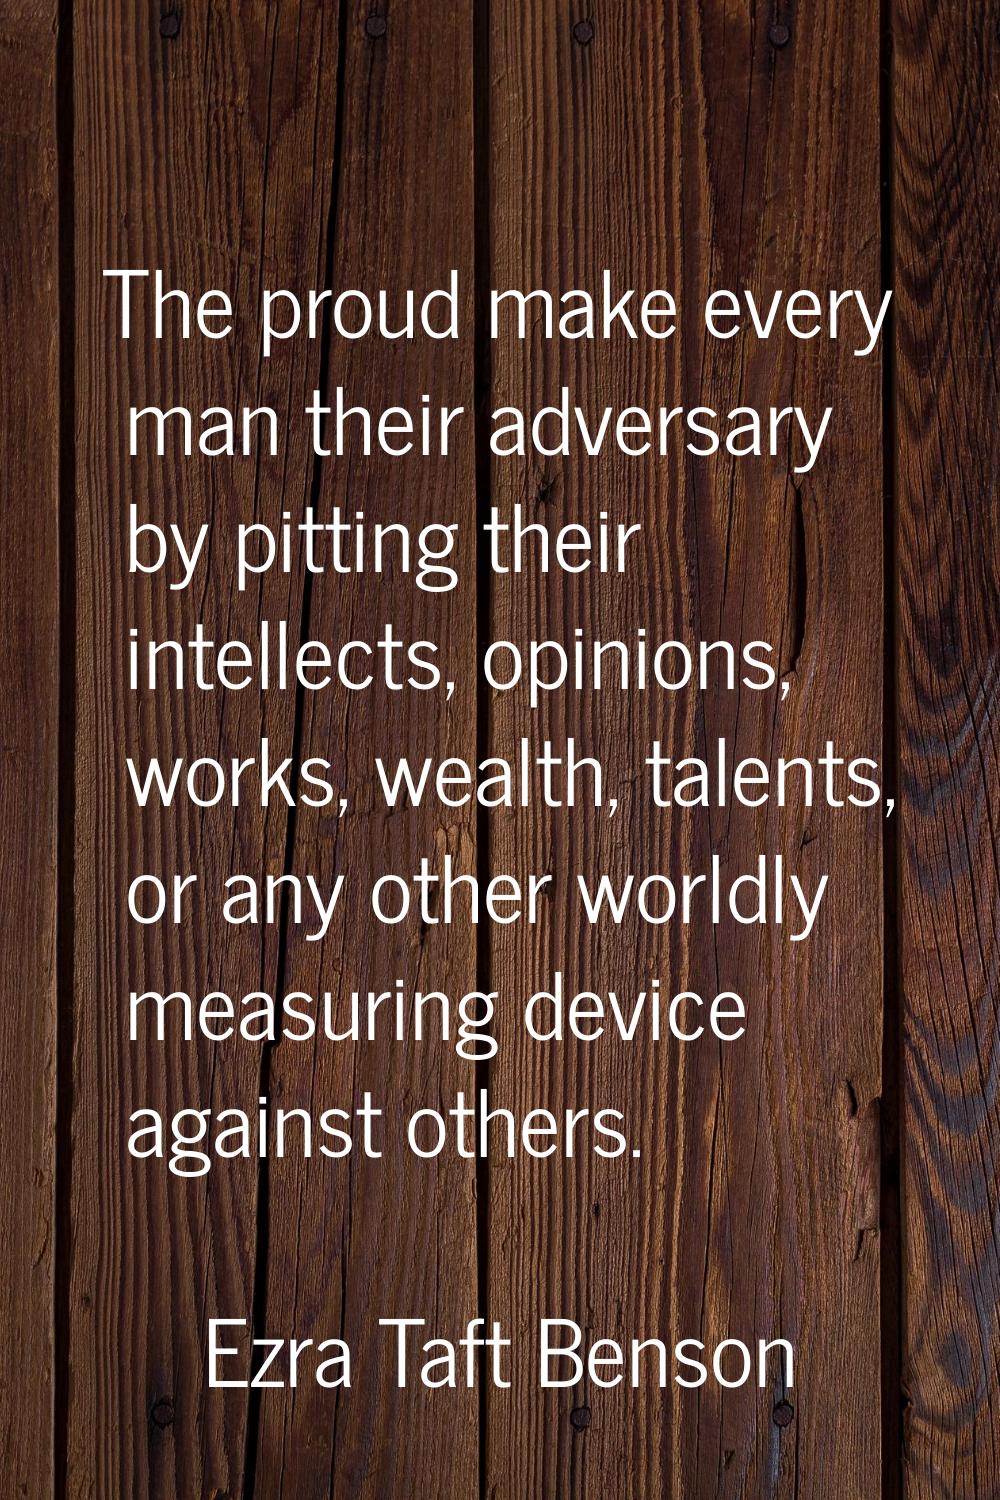 The proud make every man their adversary by pitting their intellects, opinions, works, wealth, tale